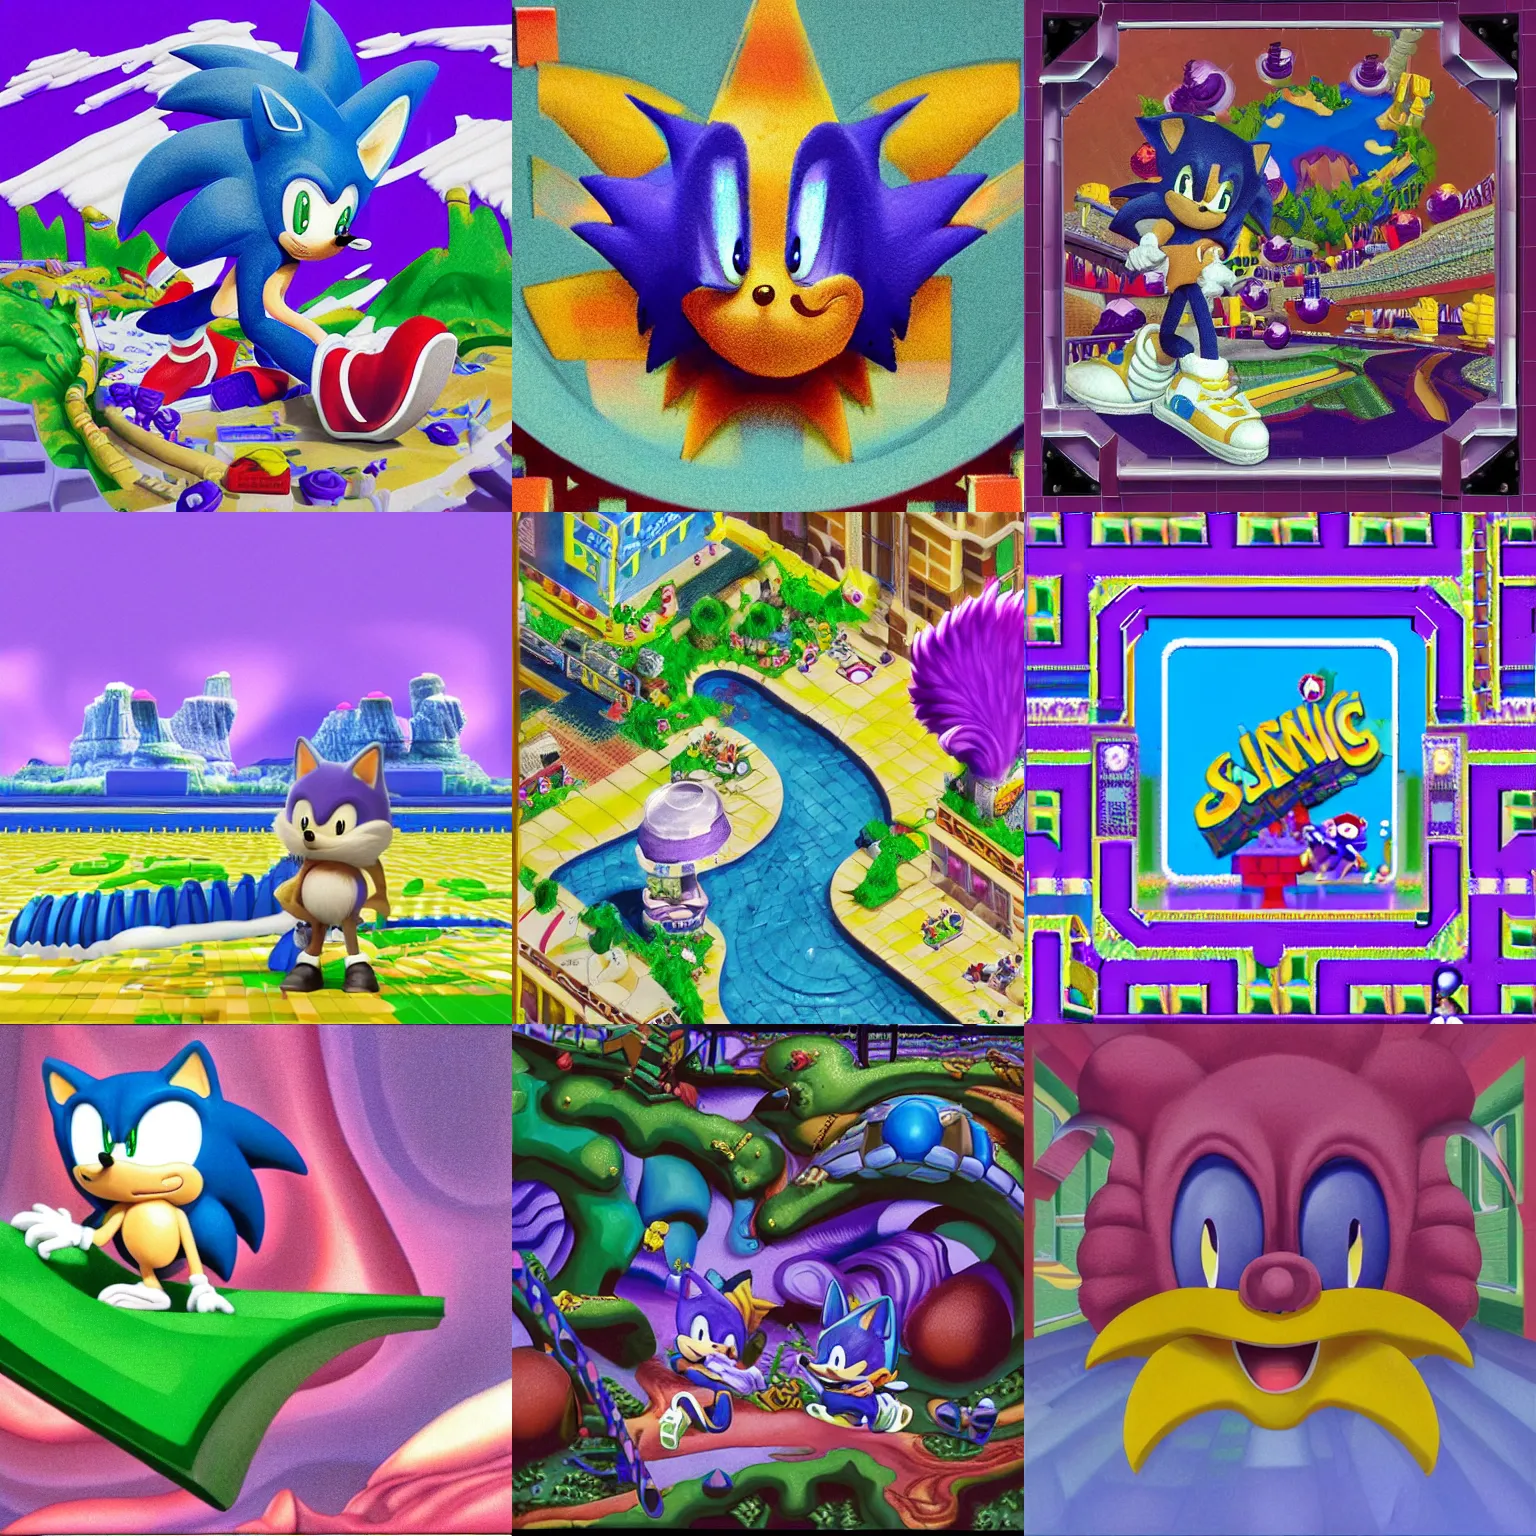 Prompt: dreaming of sonic hedgehog portrait deconstructivist claymation sega with matte painting landscape of a surreal sharp, jazz cup detailed professional soft pastels high quality airbrush art album cover of a liquid dissolving airbrush art lsd sonic the hedgehog swimming through cyberspace purple teal checkerboard background 1 9 9 0 s 1 9 9 2 sega genesis rareware video game album cover